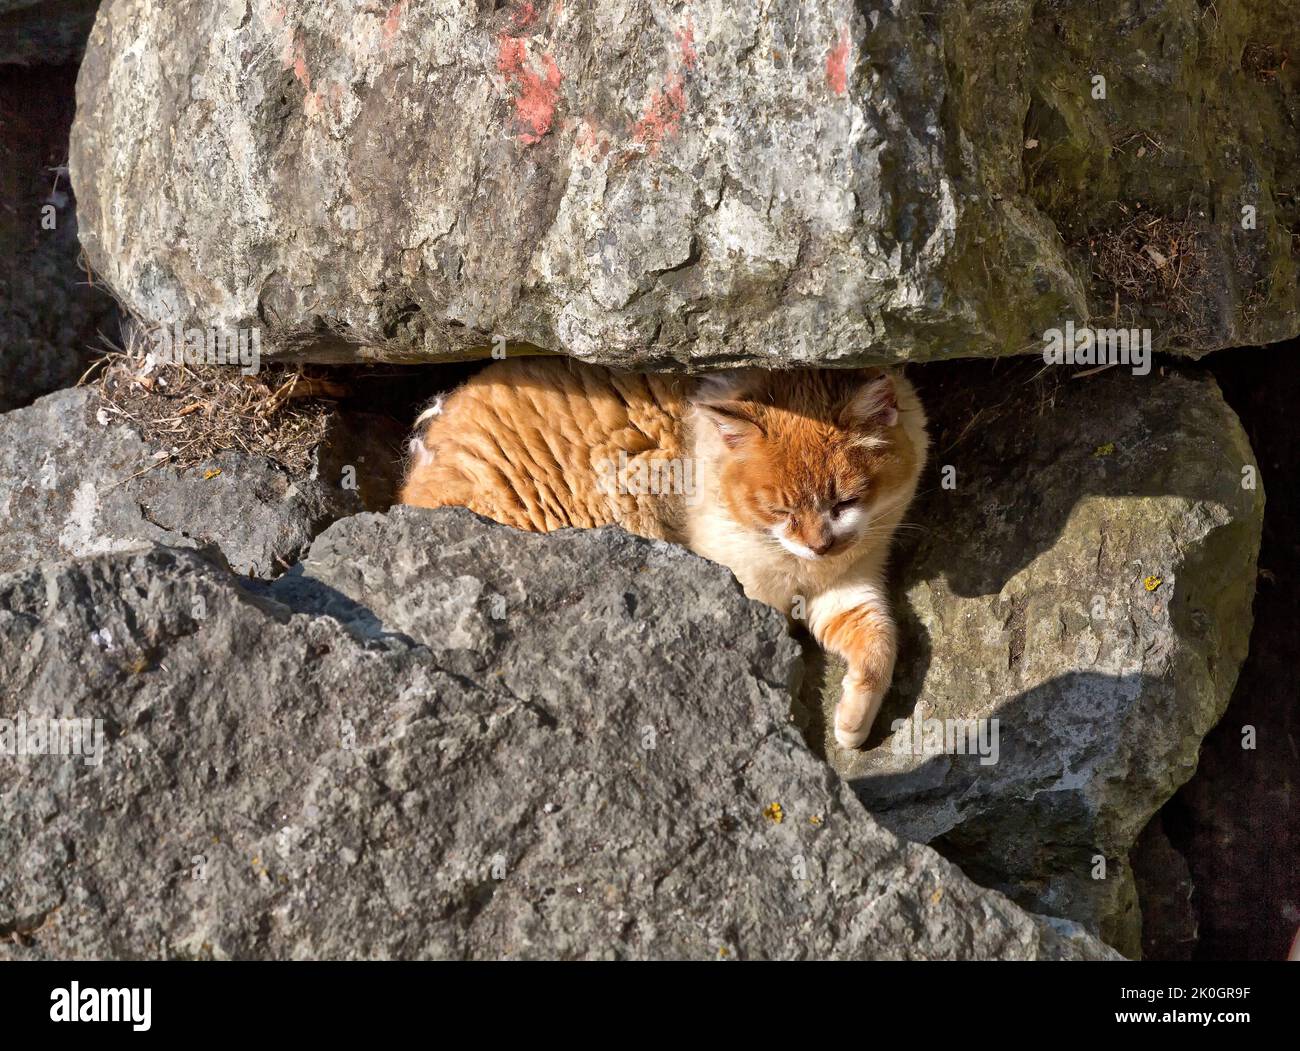 Abandoned,  homeless, neglected house cat  'Felis catus'  resting along reinforcement rocks at harbor, California West Coast. Stock Photo